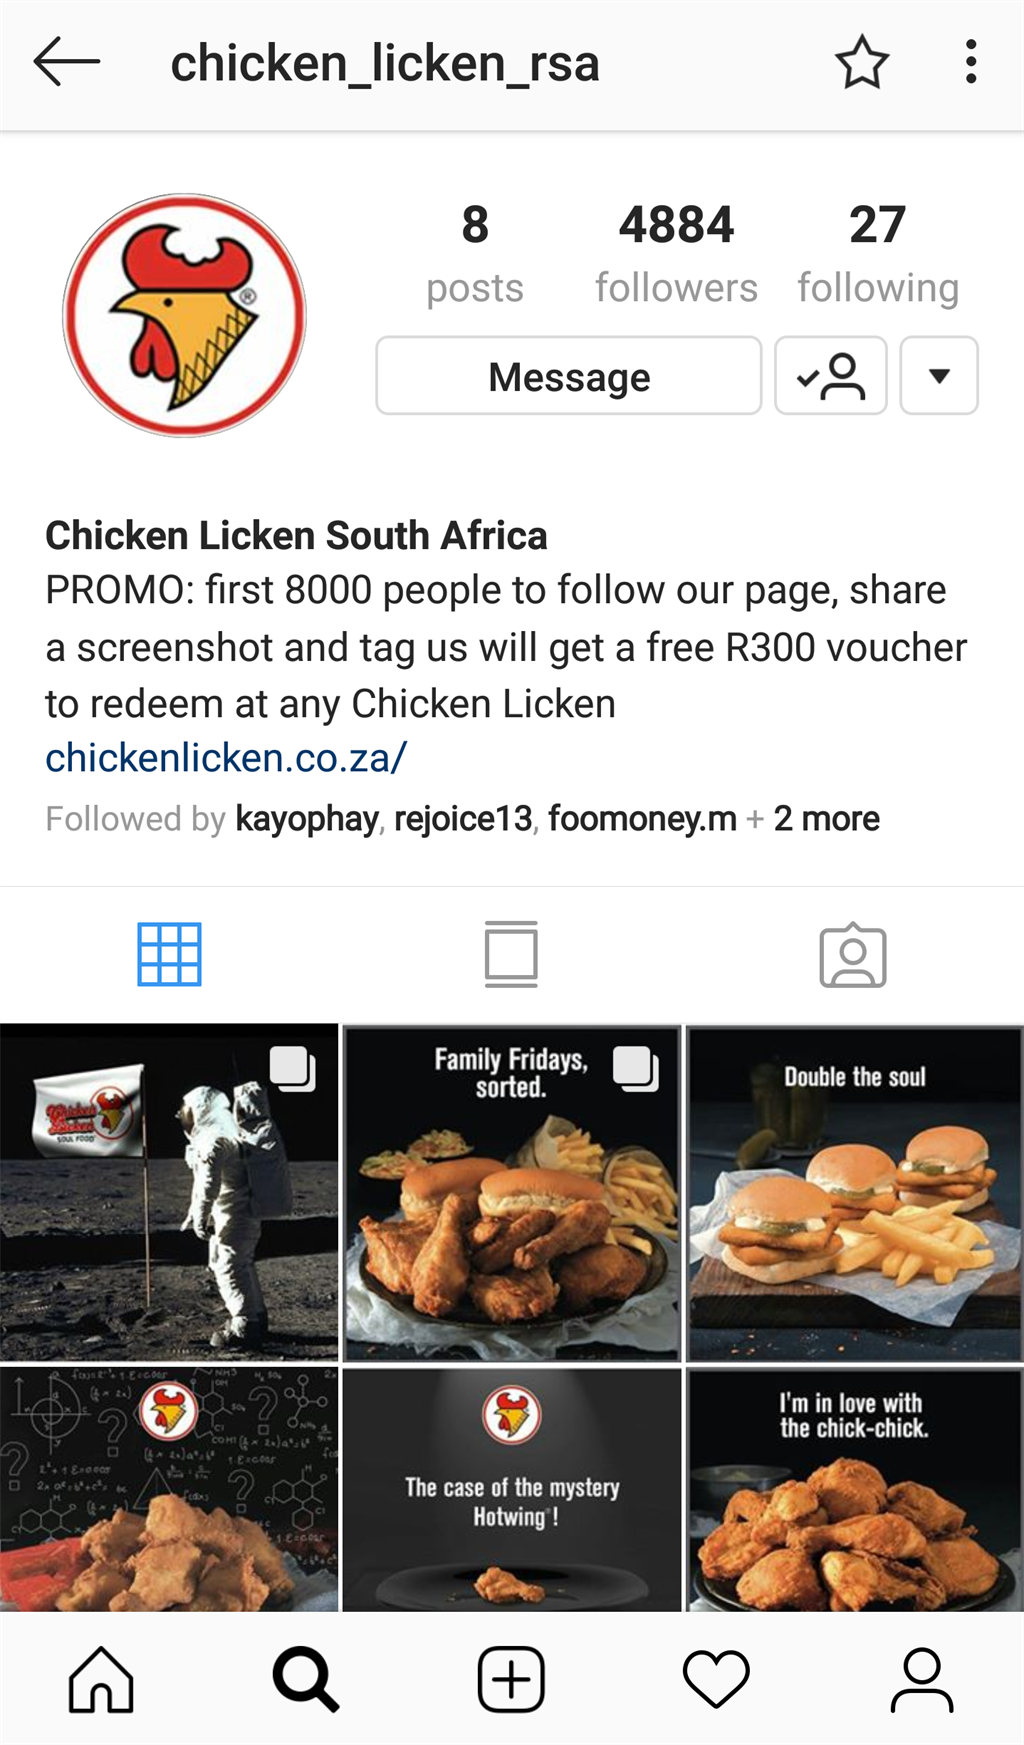 Sorry, Chicken Licken is not giving away R300 vouchers - 1024 x 1745 png 1422kB